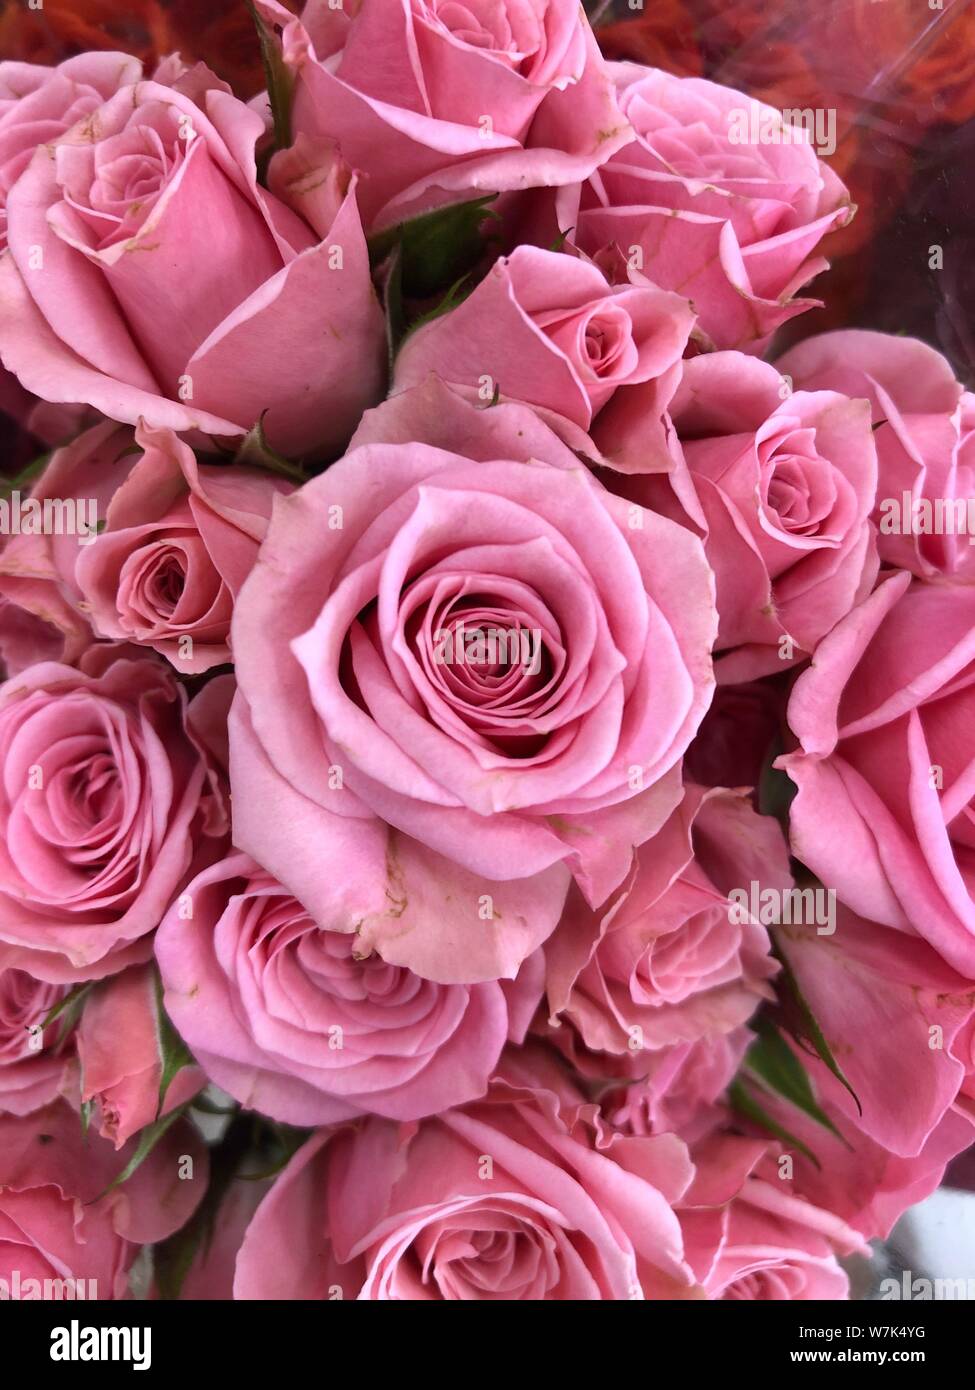 Pink Roses background beautiful flowers wallpaper crop image for